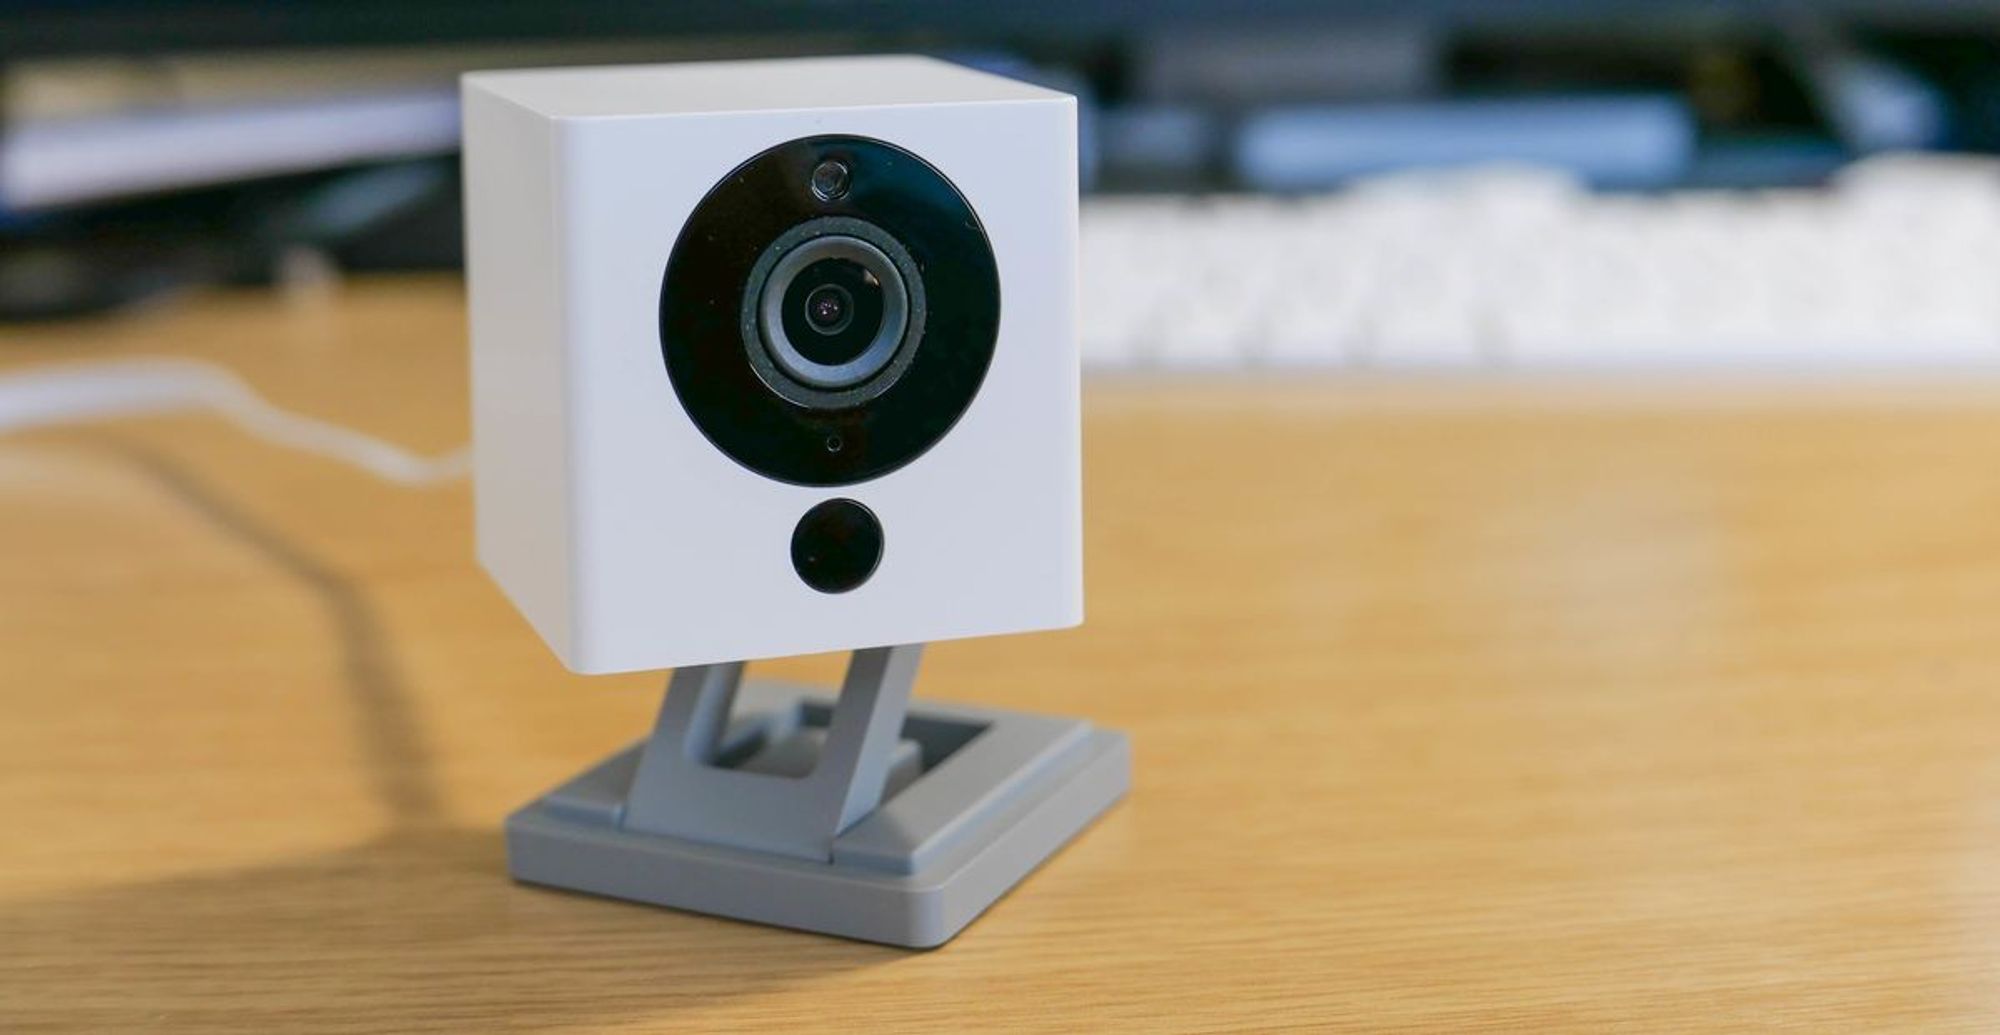 Is WYZE Cam made in China?